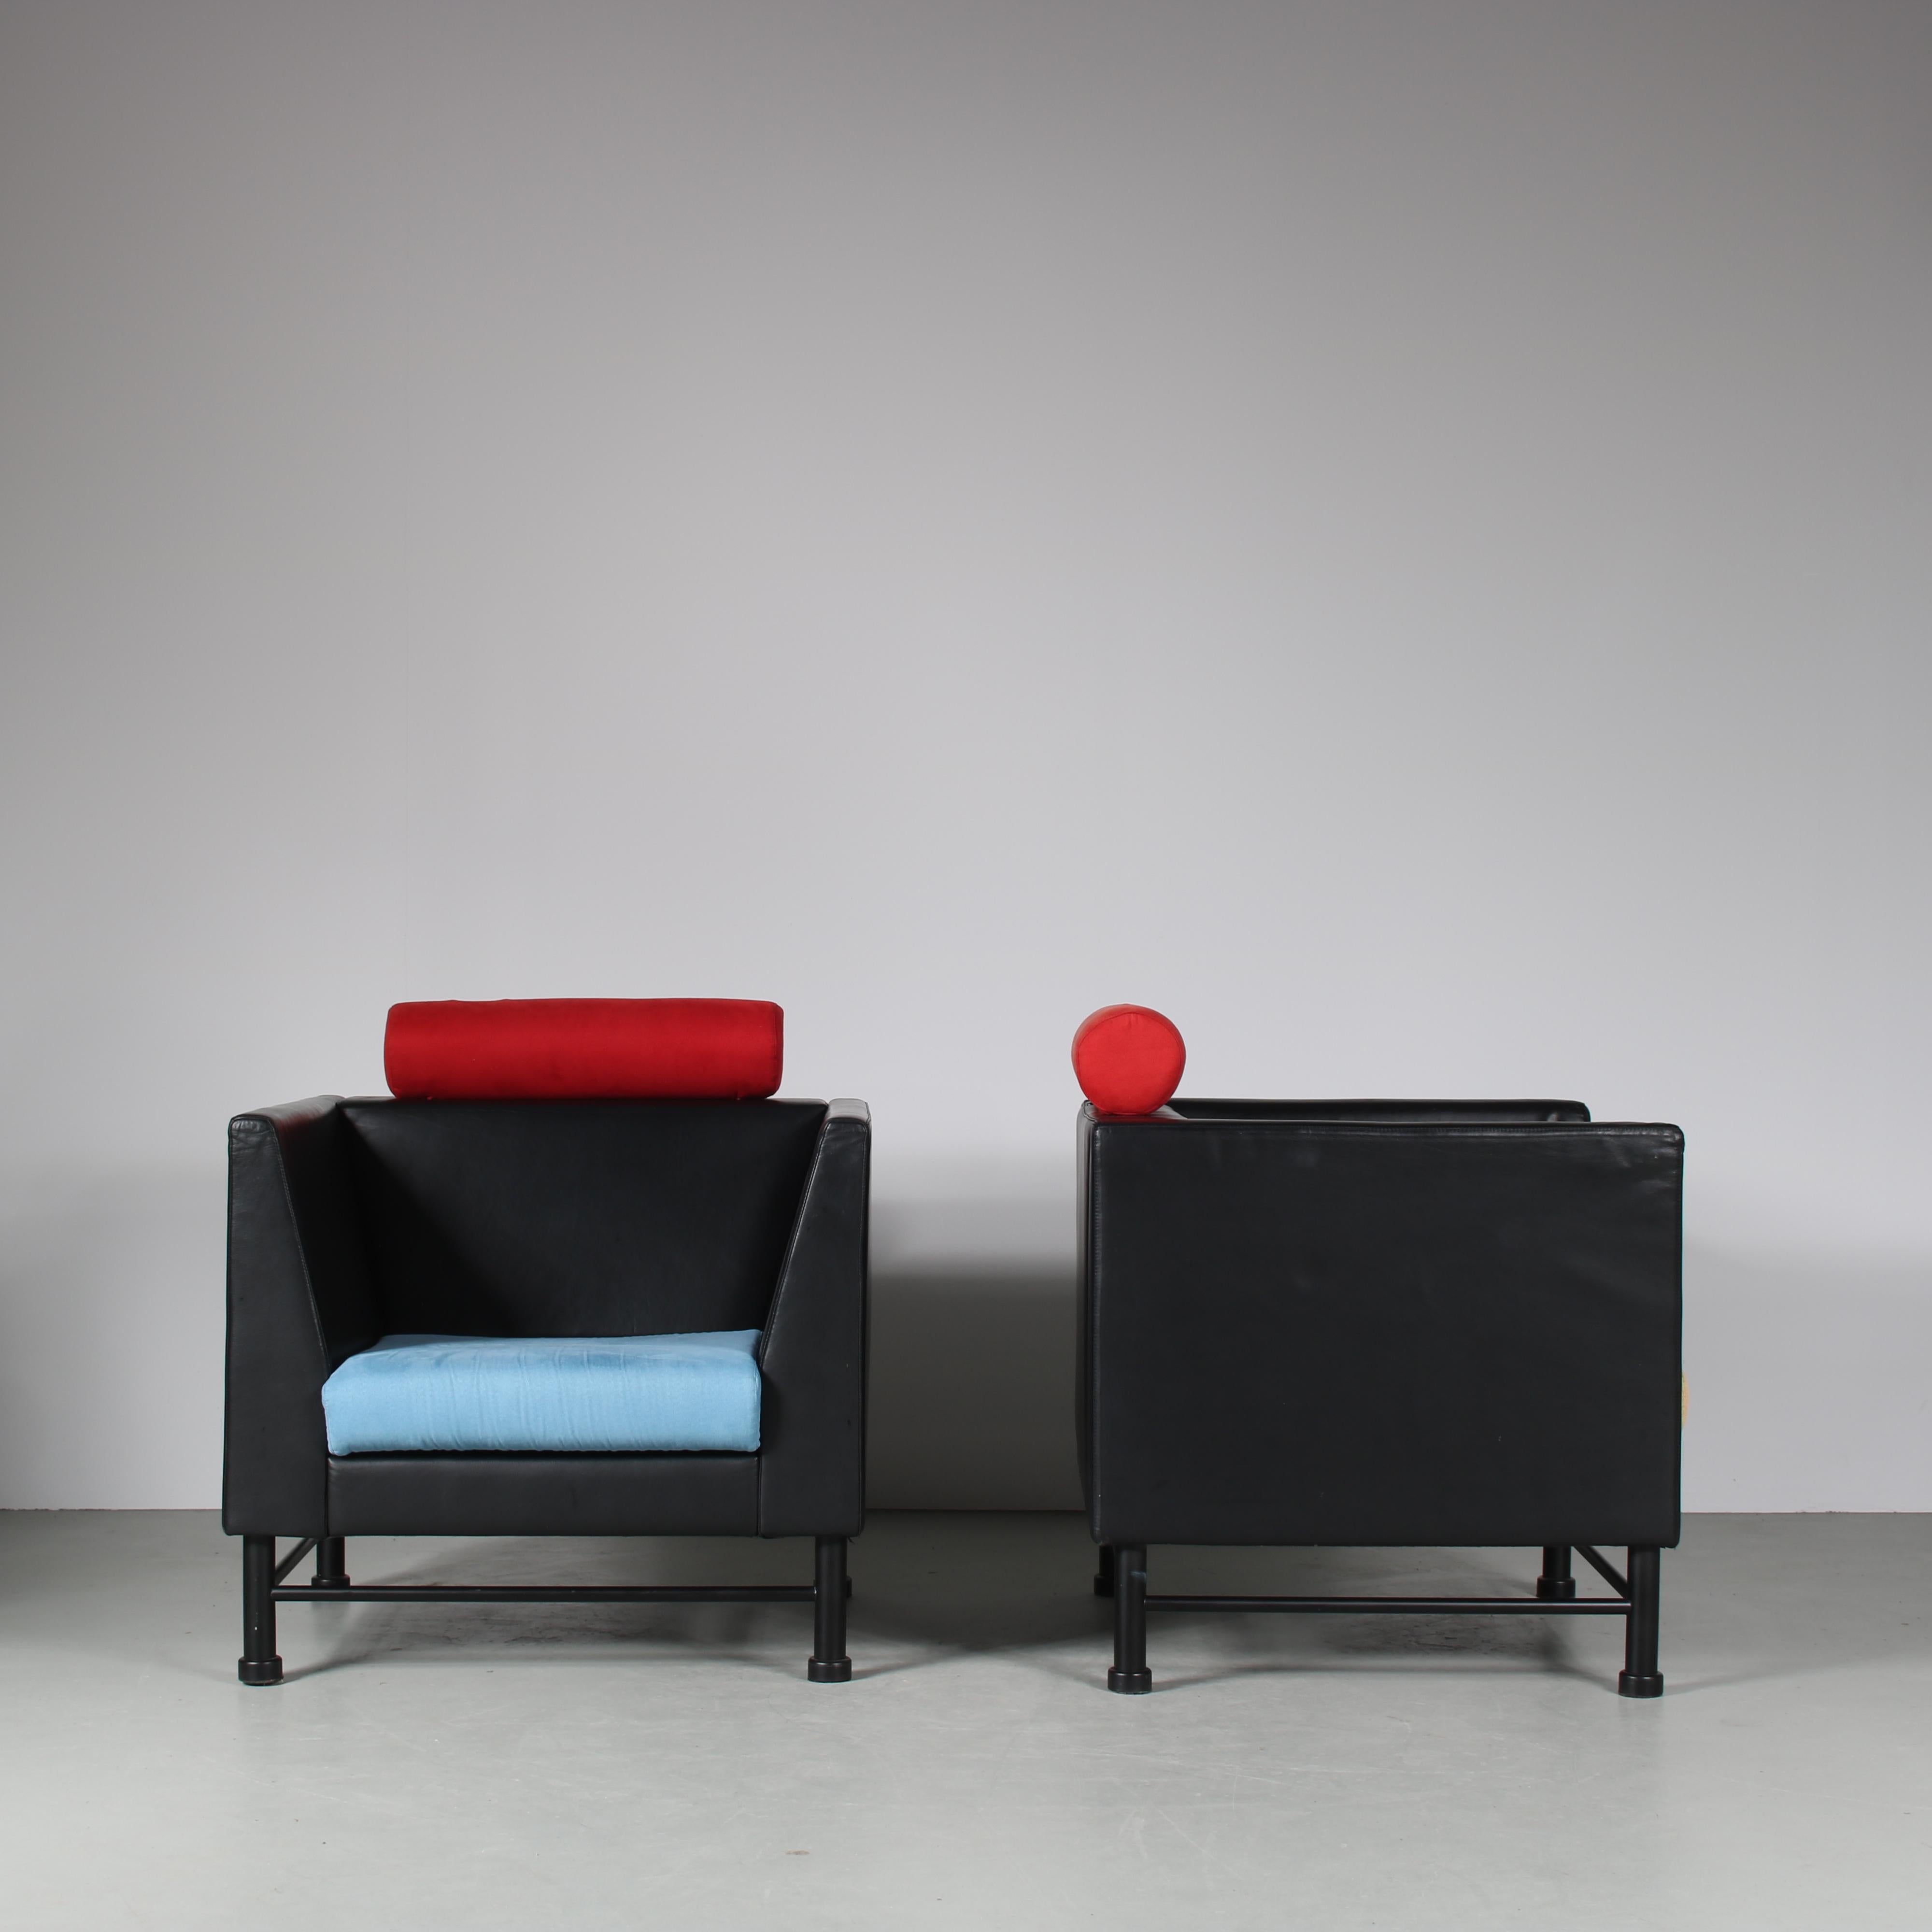 European Pair of “East Side” Chairs by Ettore Sottsass for Knoll International, USA, 1980